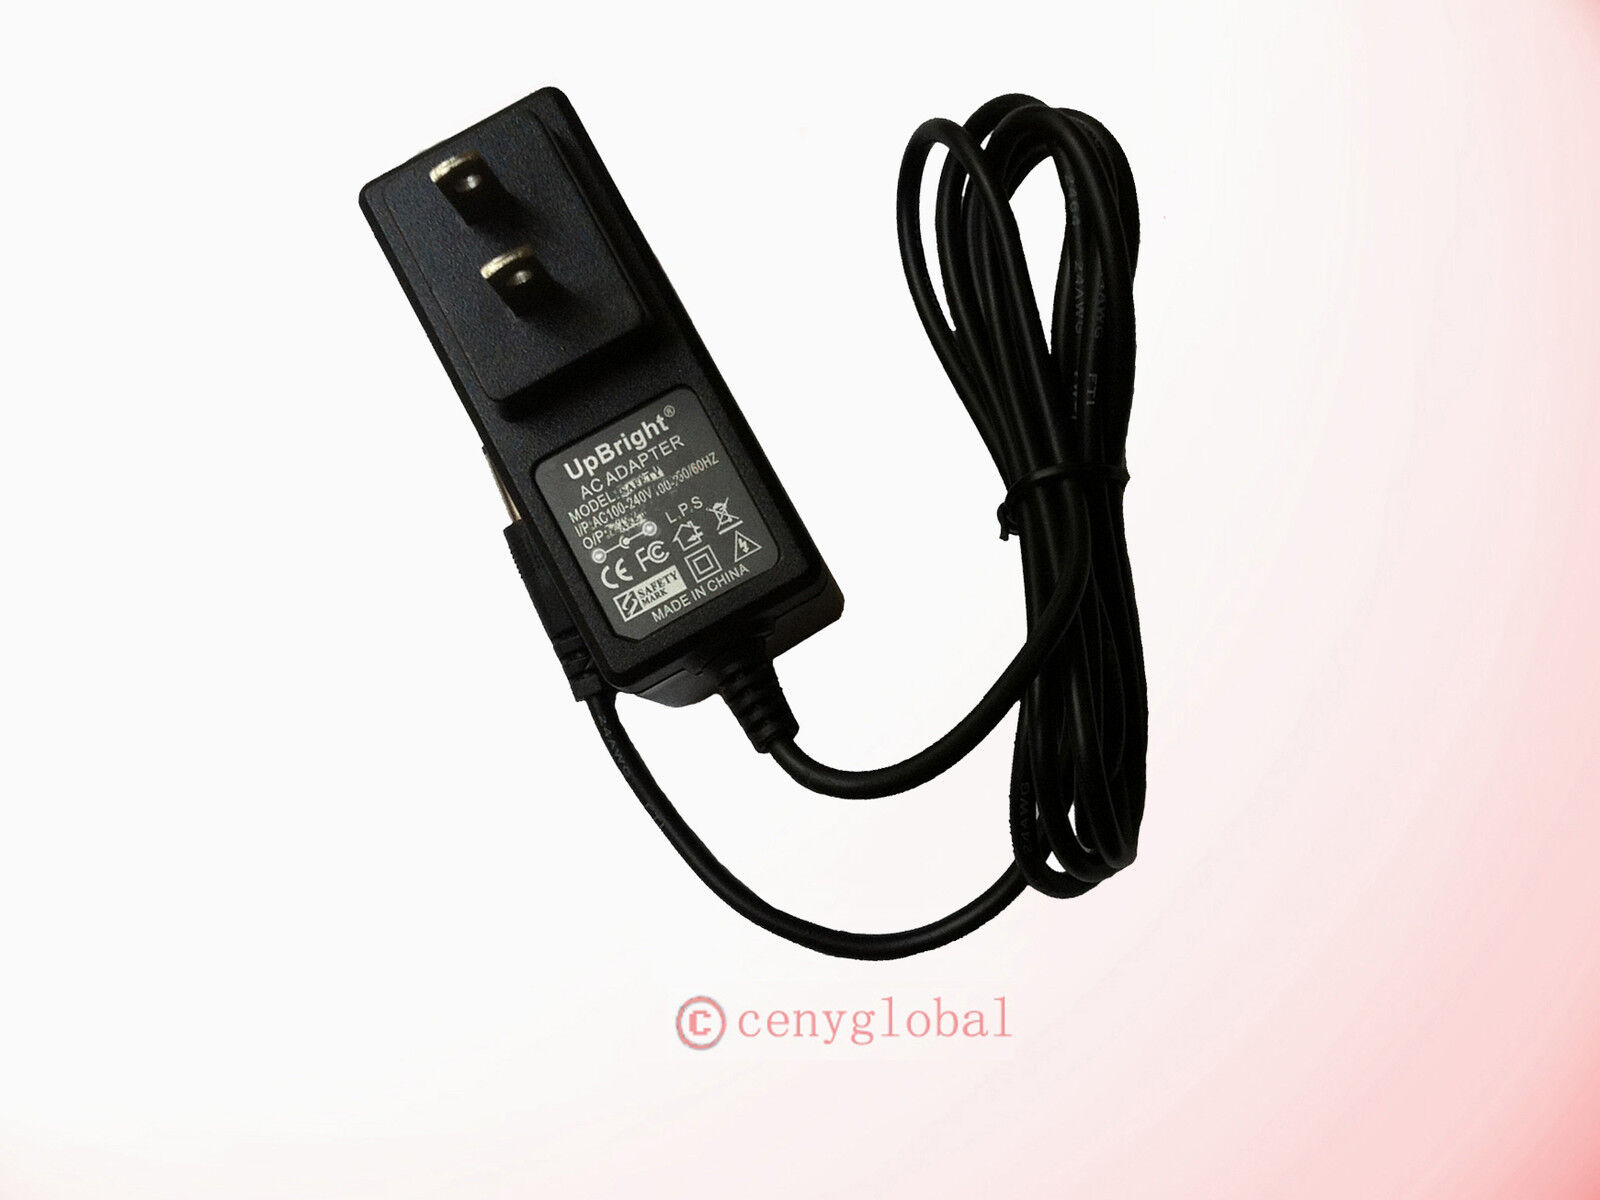 AC Adapter For StarTech.com Starview KVM Switch Power Supply Cord Wall Charger